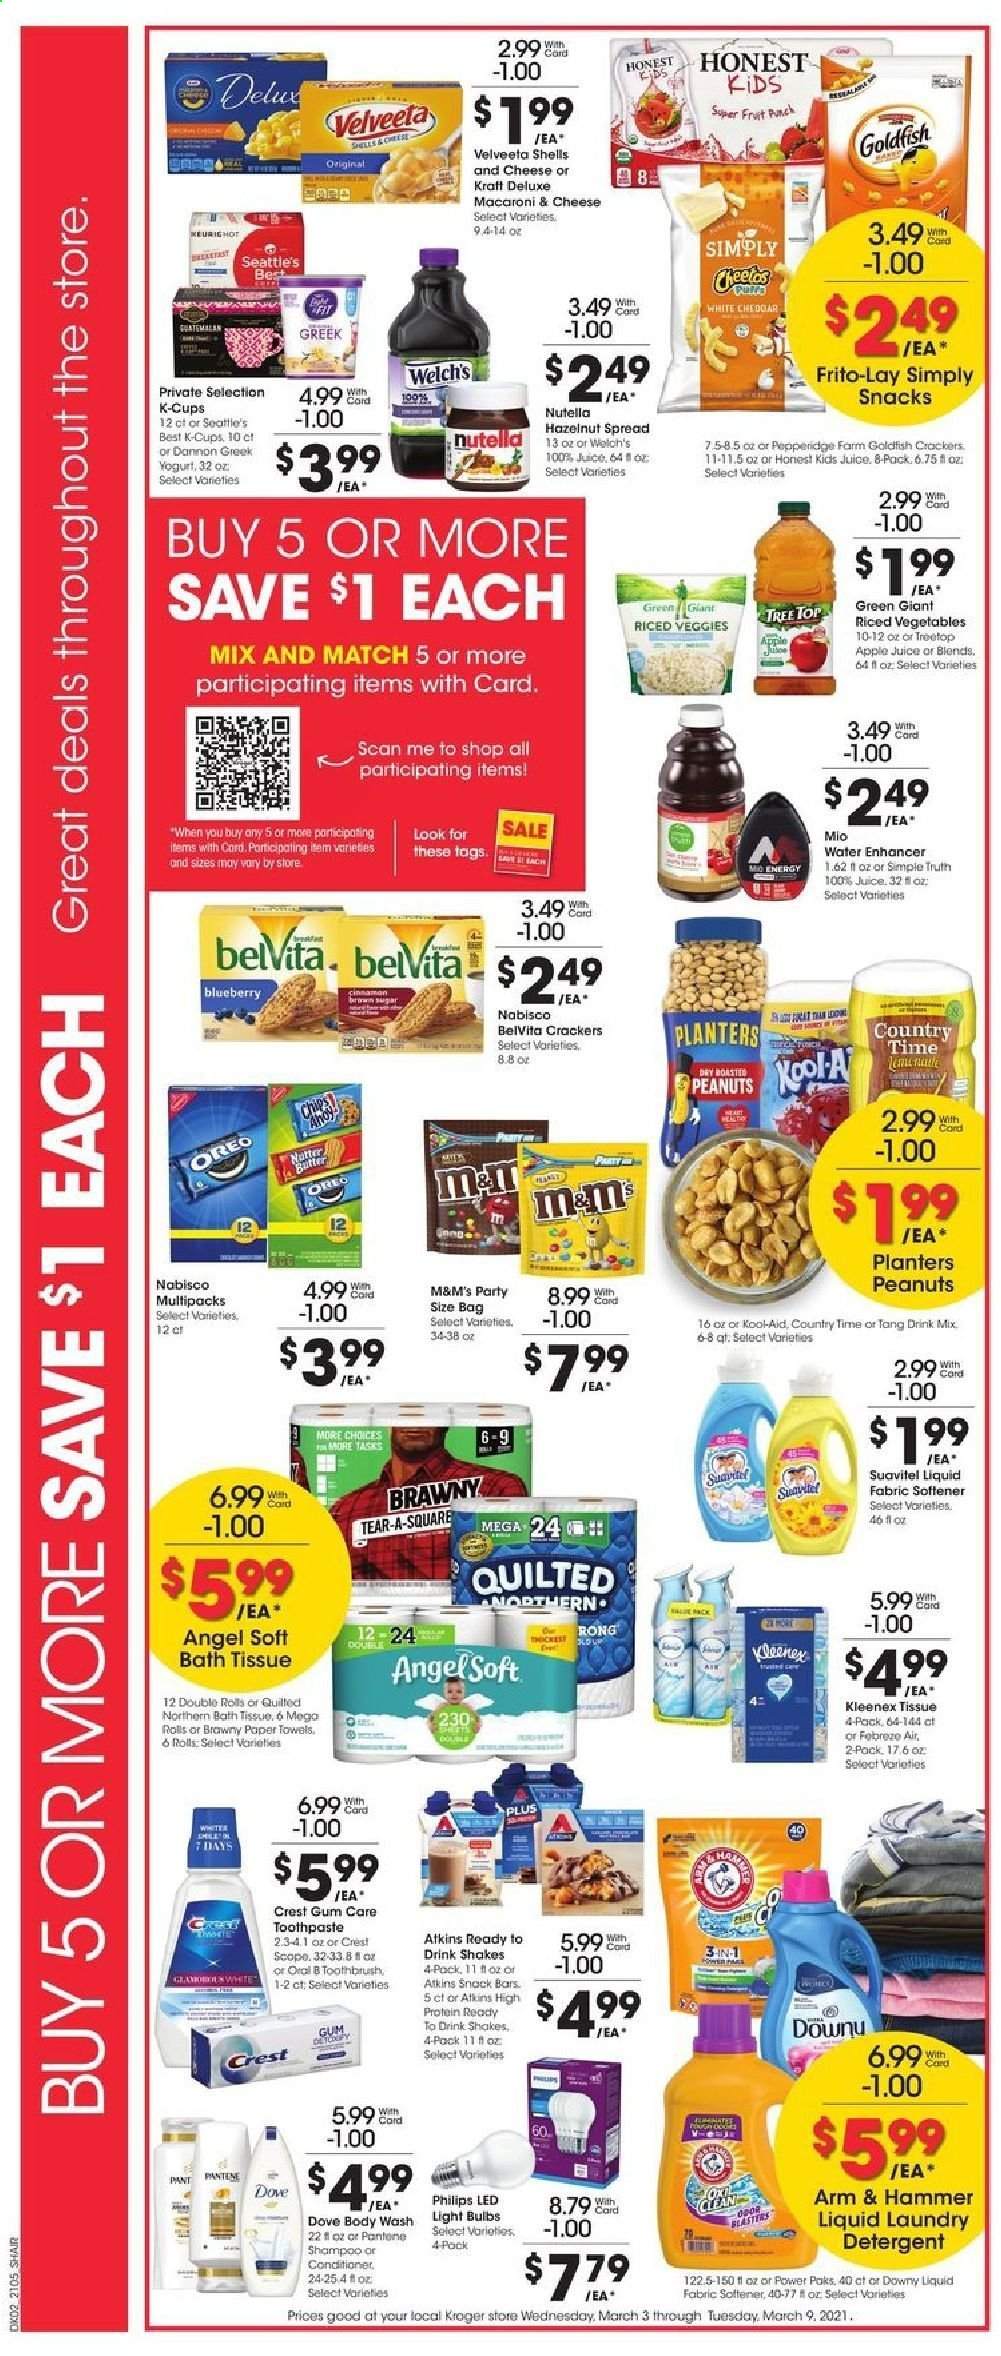 thumbnail - Kroger Flyer - 03/03/2021 - 03/09/2021 - Sales products - Philips, Apple, 7 Days, macaroni & cheese, Welch's, Kraft®, greek yoghurt, Oreo, yoghurt, Dannon, shake, butter, Nutella, M&M's, crackers, snack, Goldfish, Frito-Lay, ARM & HAMMER, belVita, peanuts, Planters, apple juice, juice, Country Time, coffee capsules, K-Cups, punch, Dove, bath tissue, Kleenex, Quilted Northern, kitchen towels, paper towels, detergent, fabric softener, laundry detergent, body wash, shampoo, toothbrush, Oral-B, toothpaste, Crest, conditioner, Pantene, bulb, light bulb, bag. Page 3.